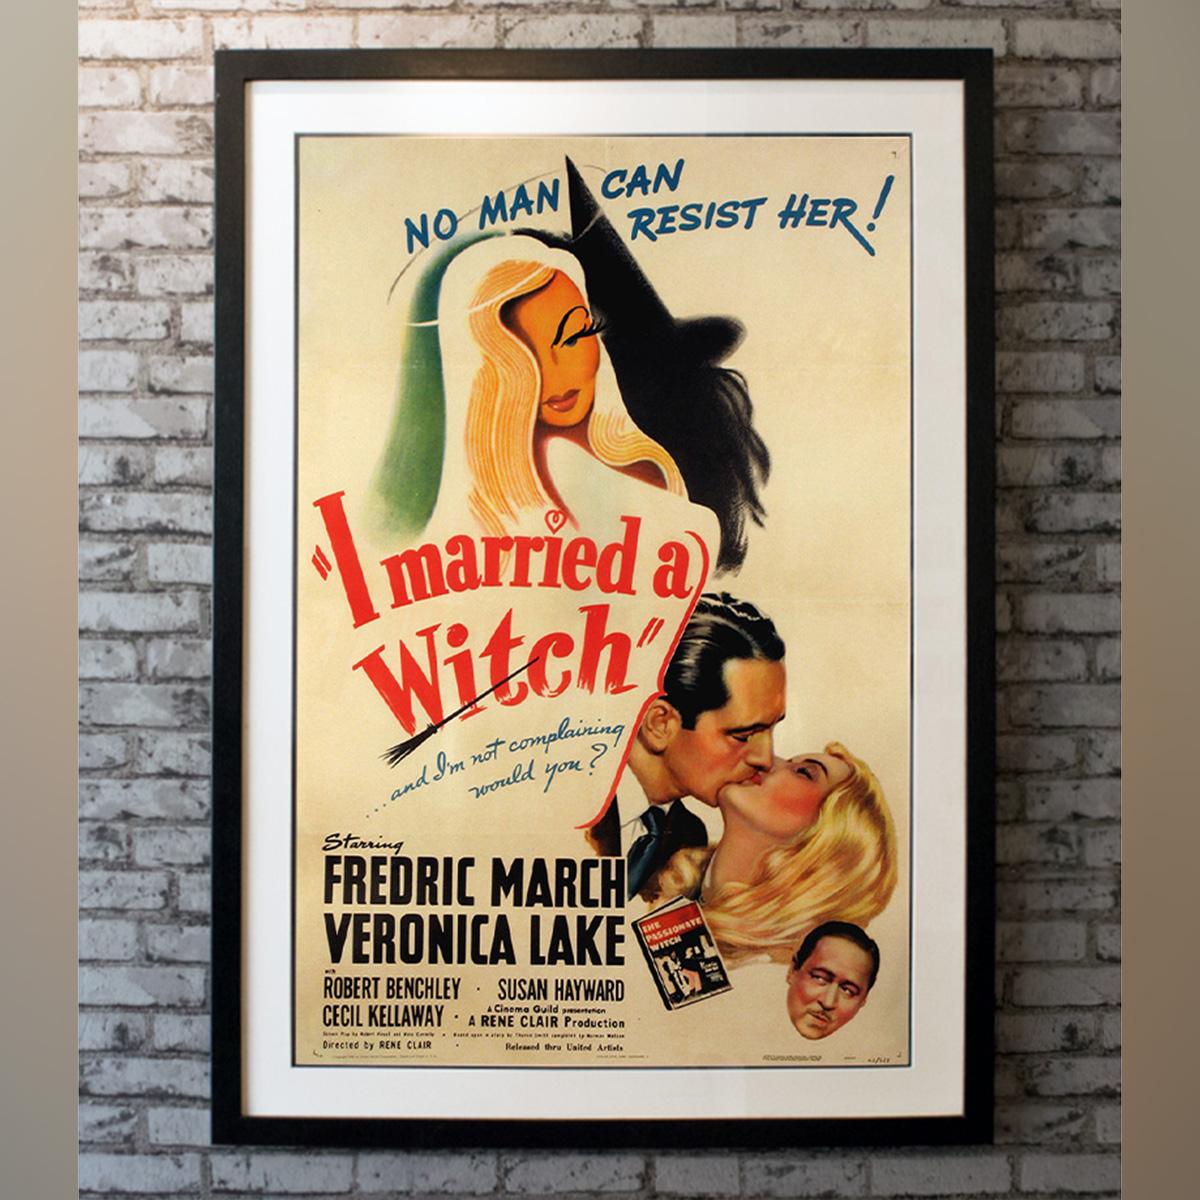 Veronica Lake was riding an incredible wave of fame when she starred alongside Fredric March in this hilarious tale of a witch who accidentally falls in love with the man she intended to curse. Lake is featured twice on the poster and is